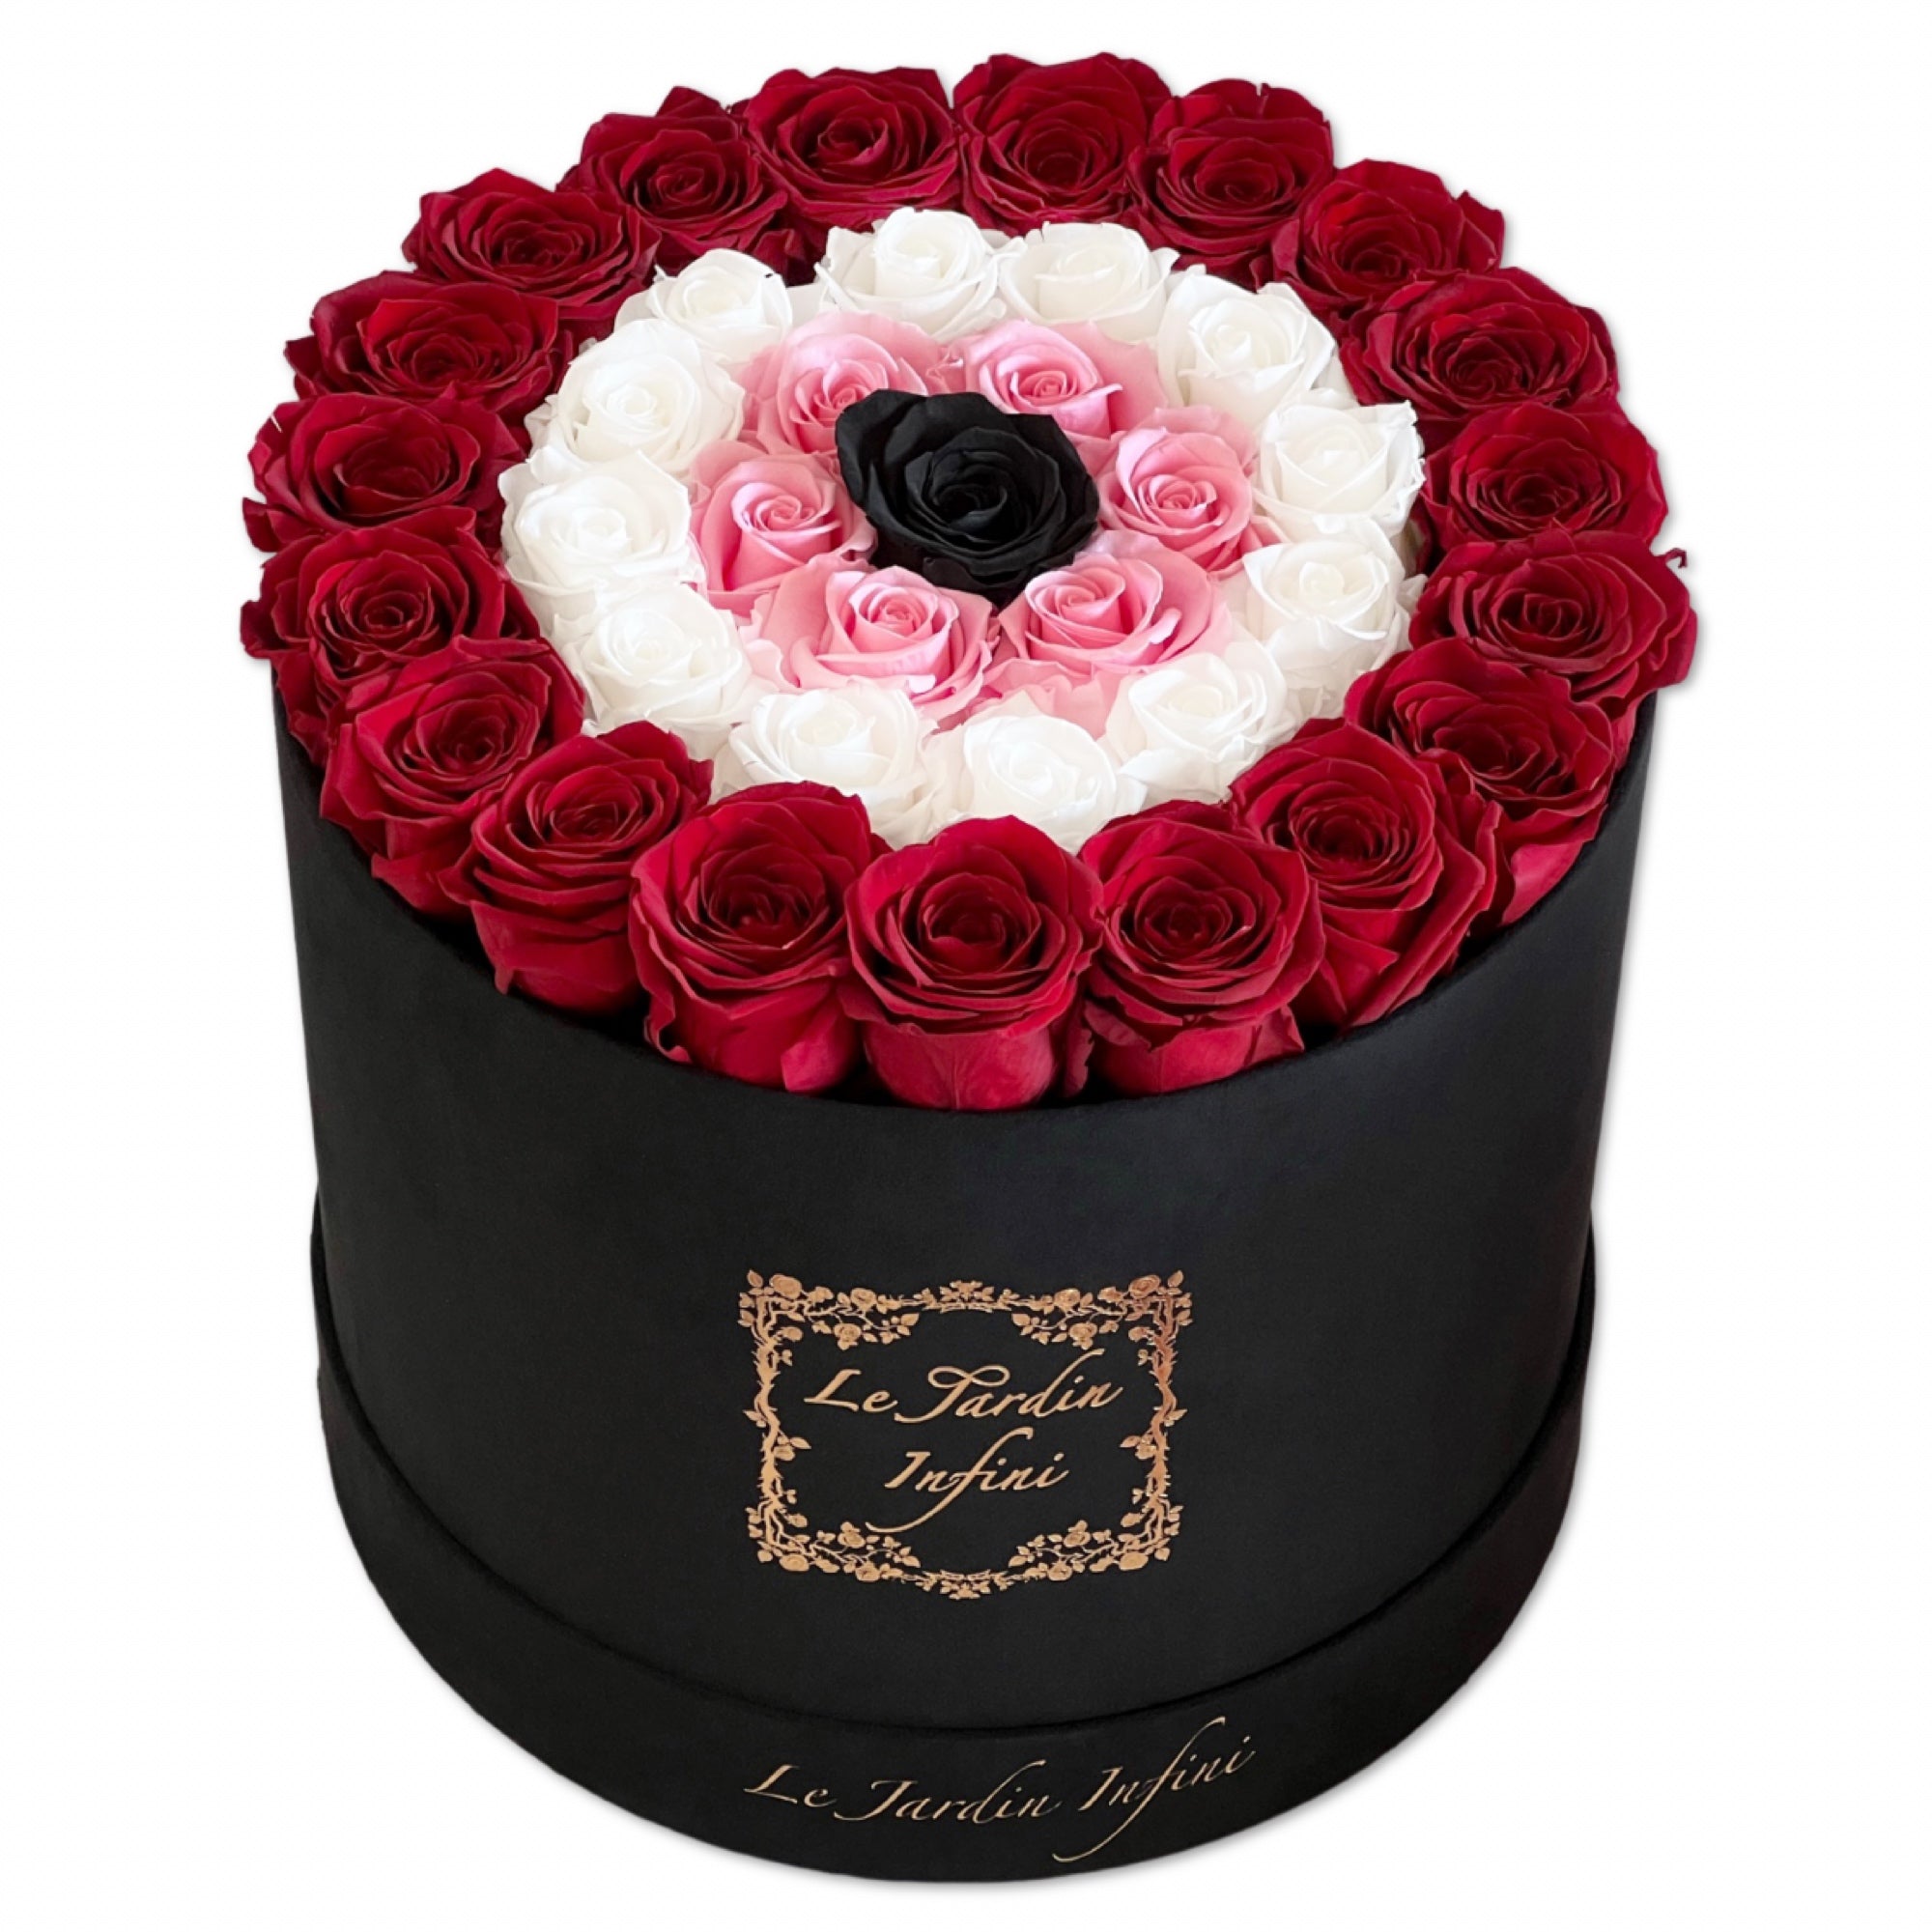 Red Evil Eye- Deep Red, White, Soft Pink and Black Preserved Roses-Large Round Luxury Black Suede Box